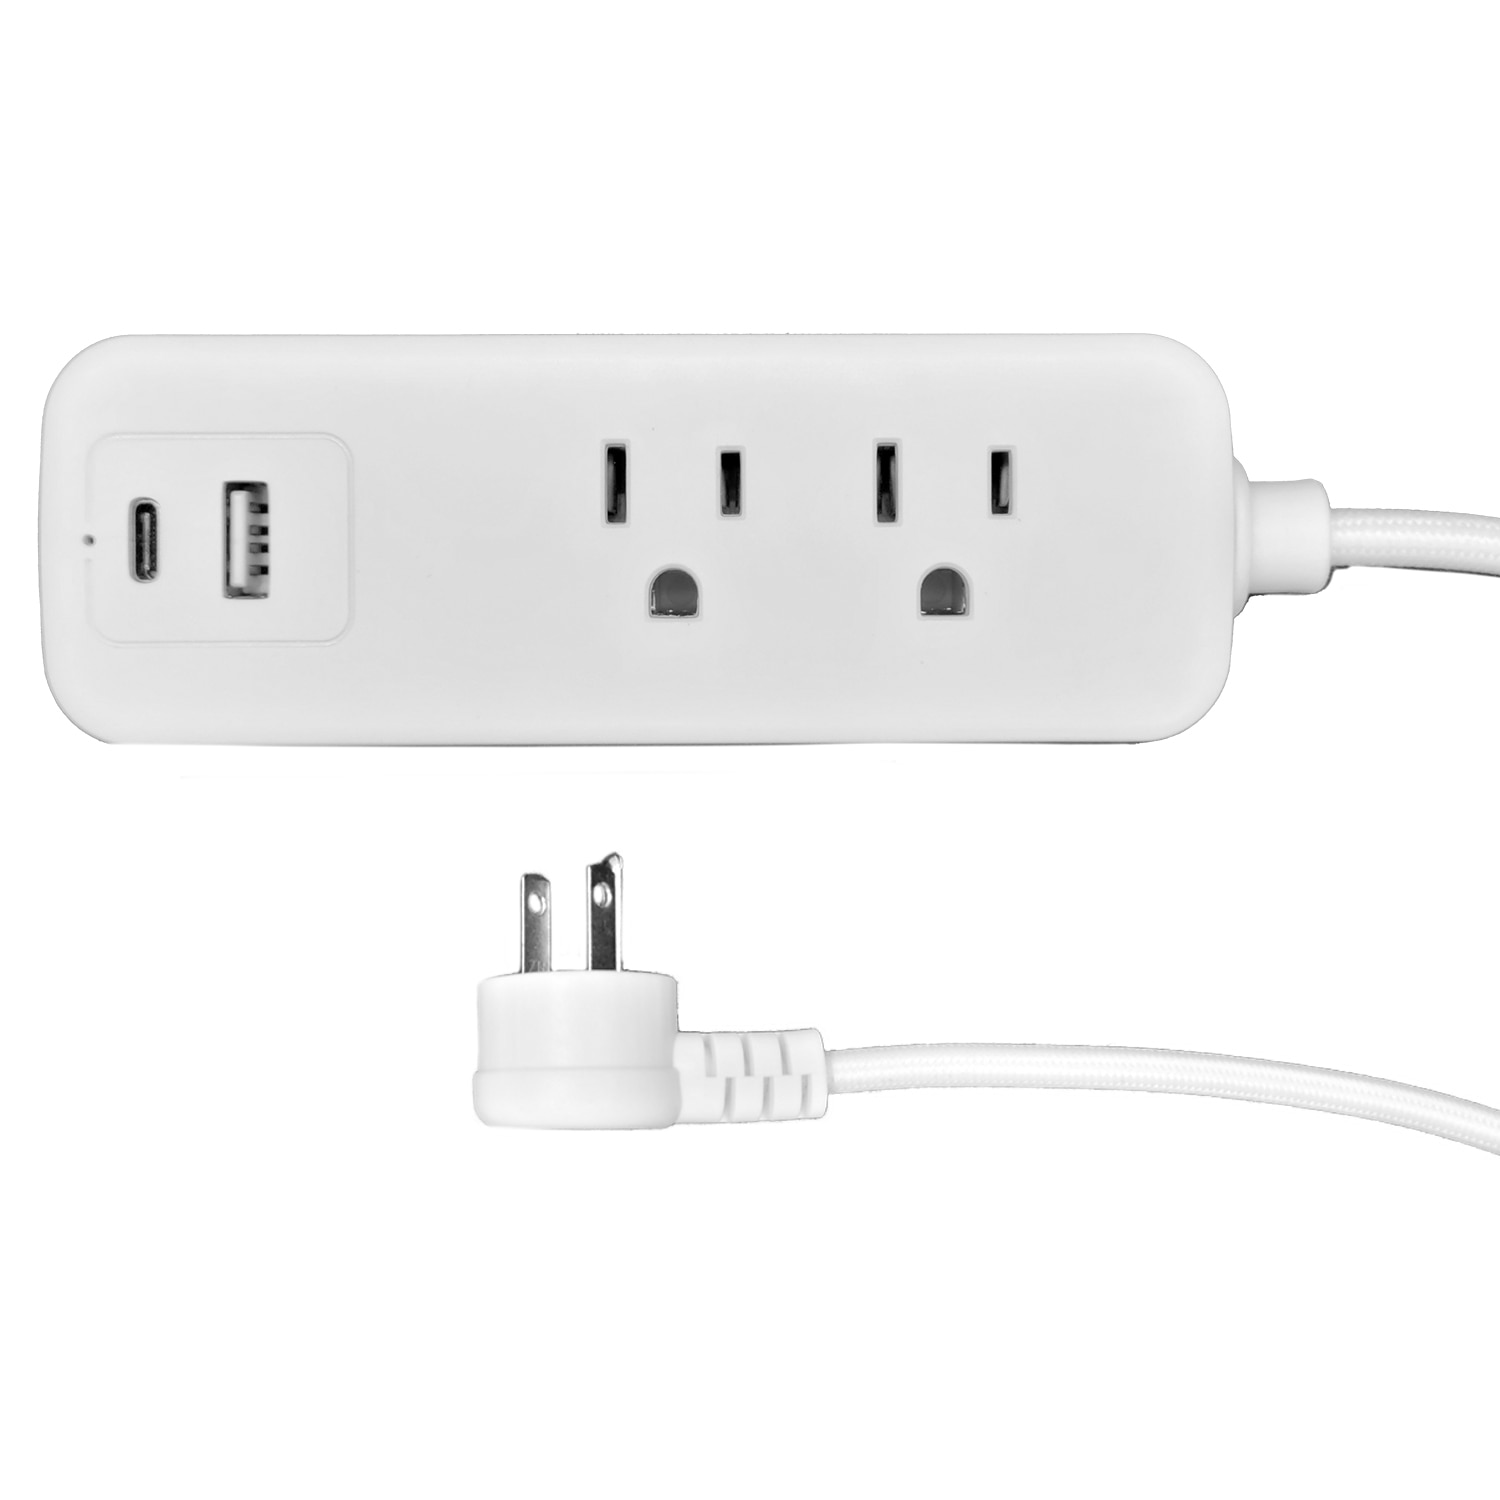 5FT Braided Cord Extendable Charging Station 2AC + 1USB + 1USBC w/ Surge Protection ETL Certified-White